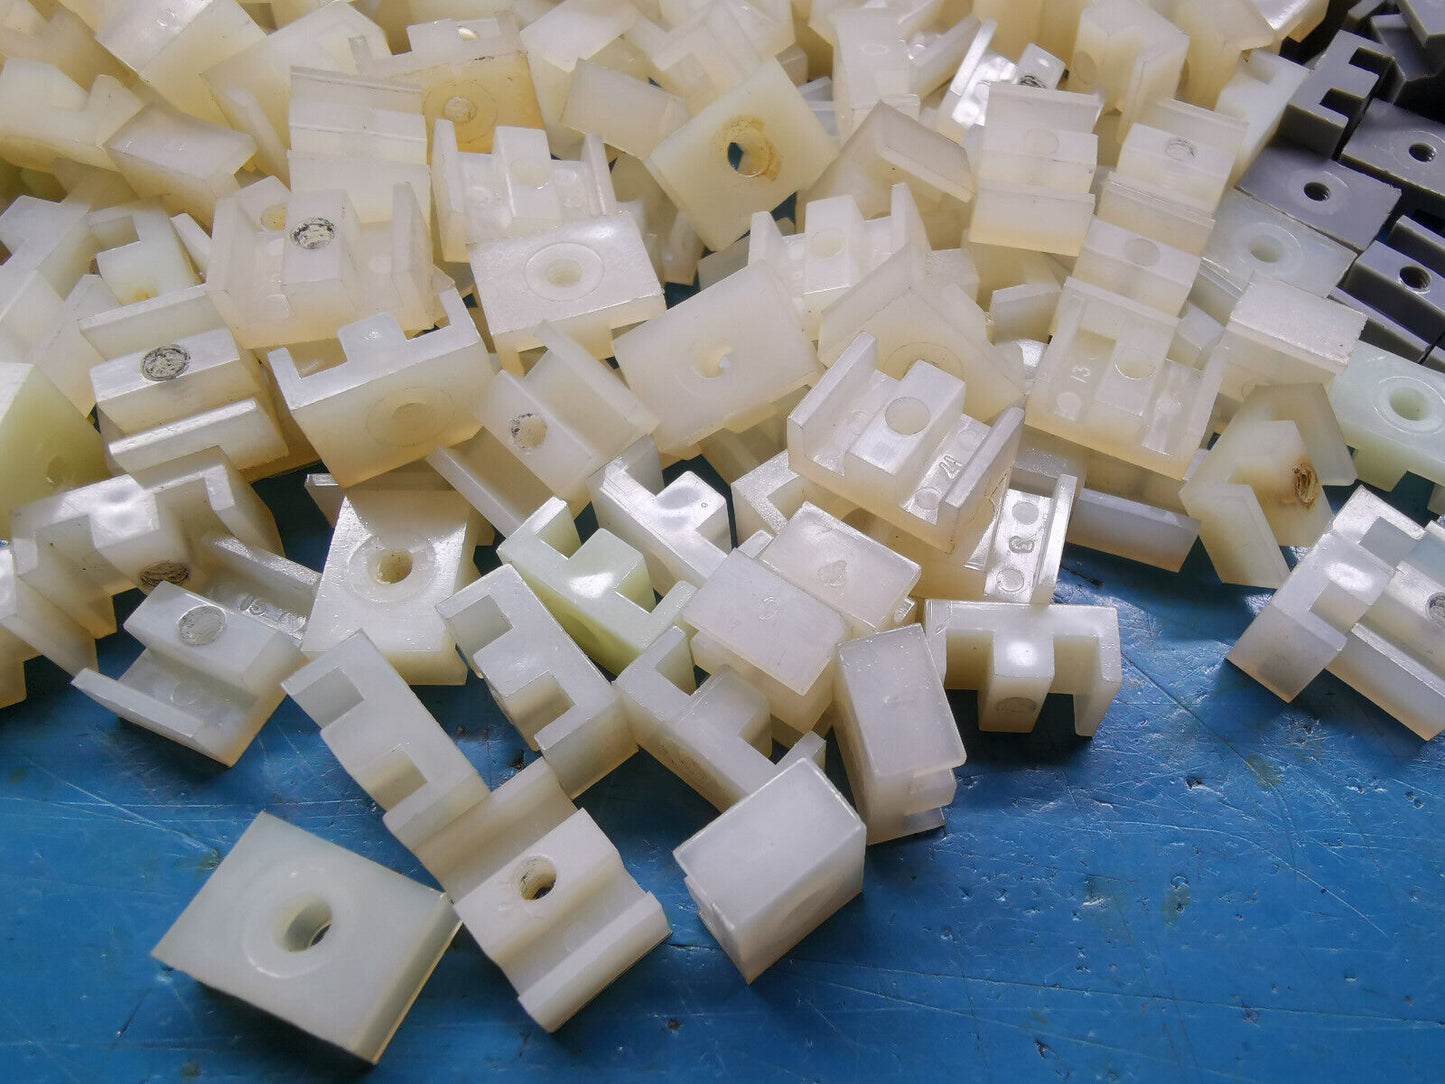 Over 350pcs PCB Slotted Spacer